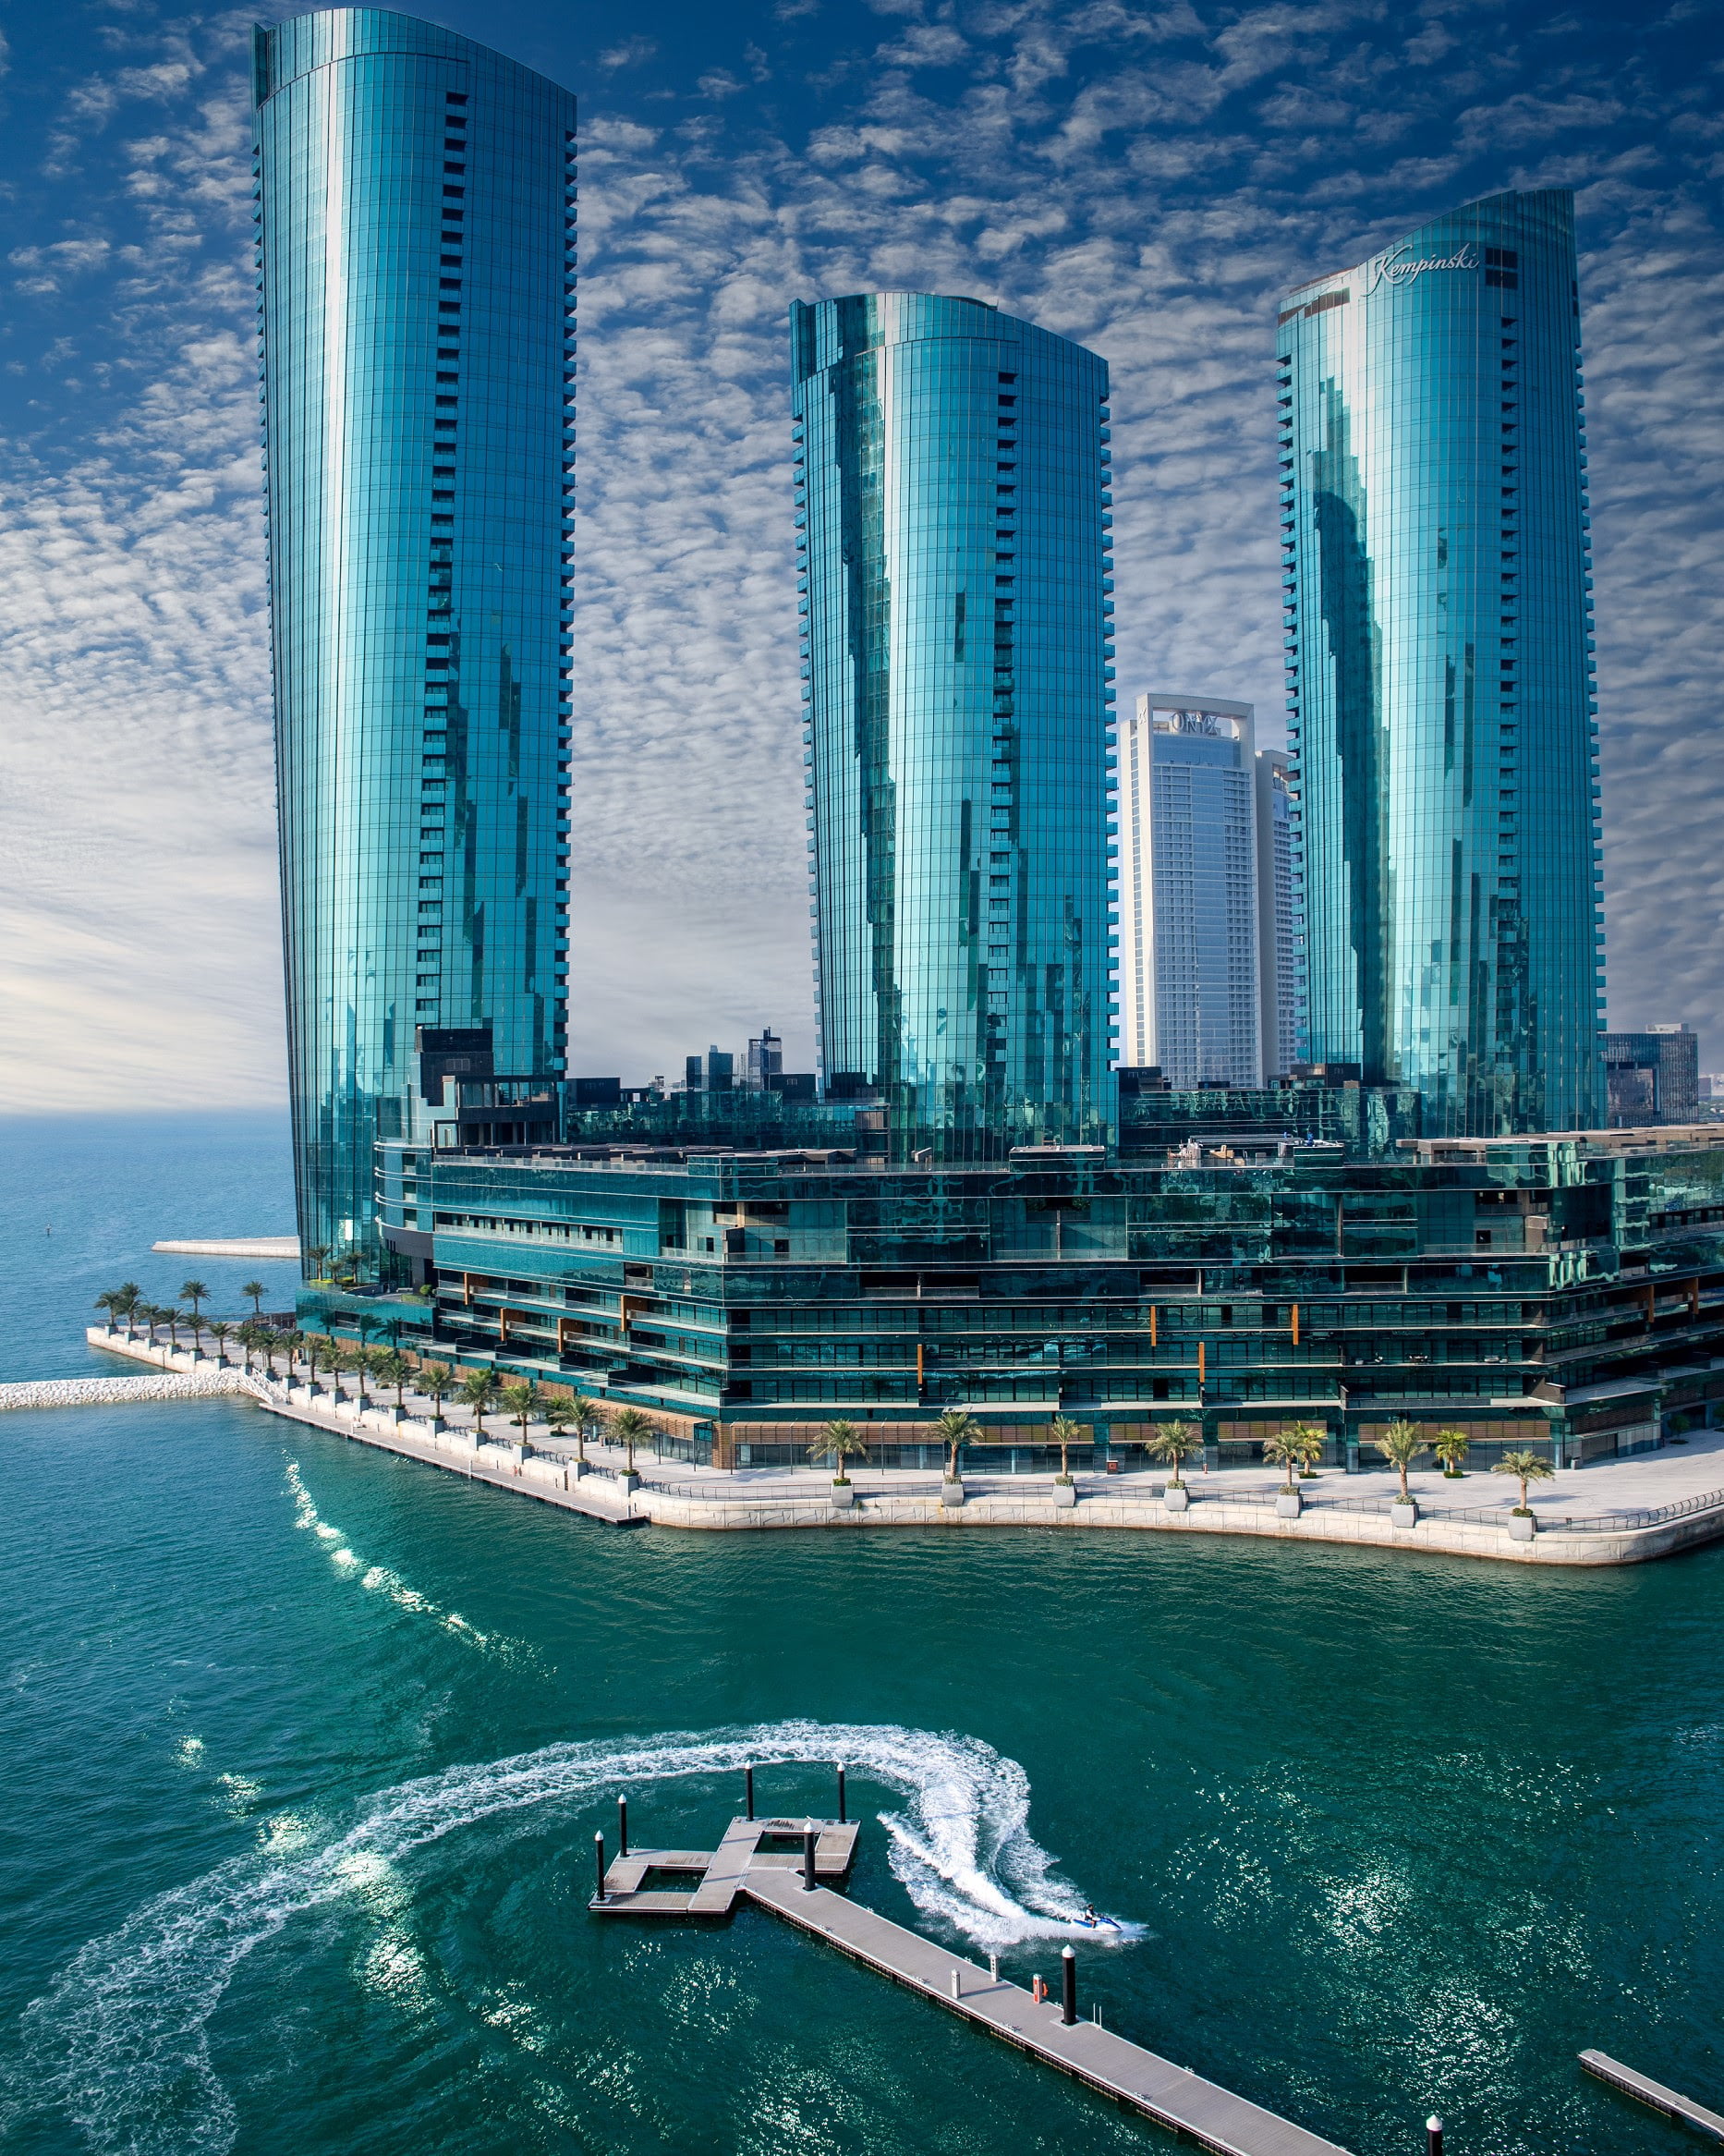 Bahrain Harbour embraces the return of the Kempinski Hotel and Residences to Bahrain